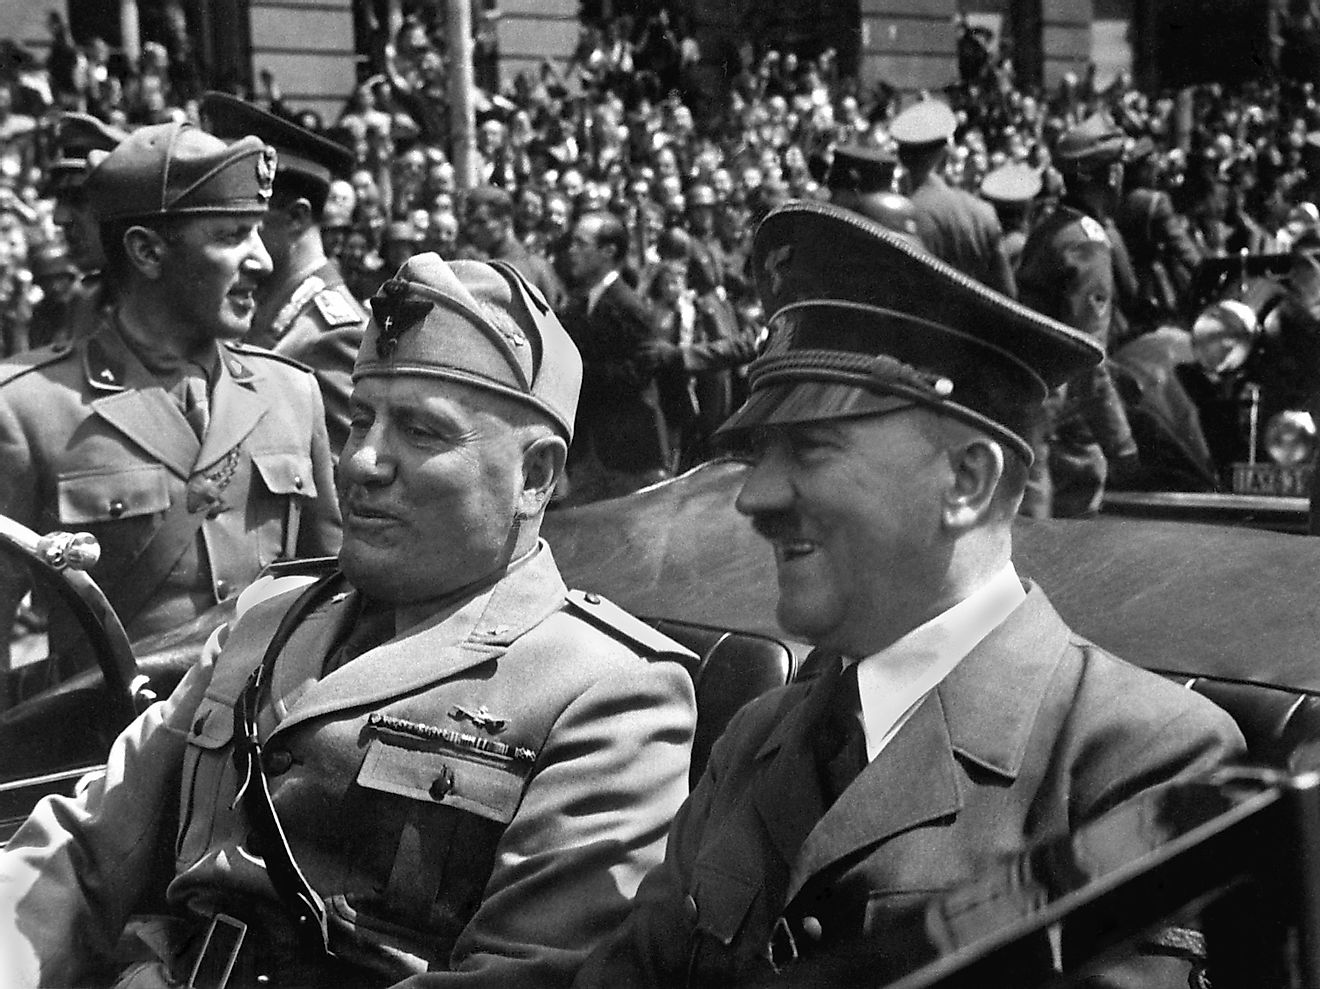 Hitler and Mussolini in Munich, Germany, June 18, 1940